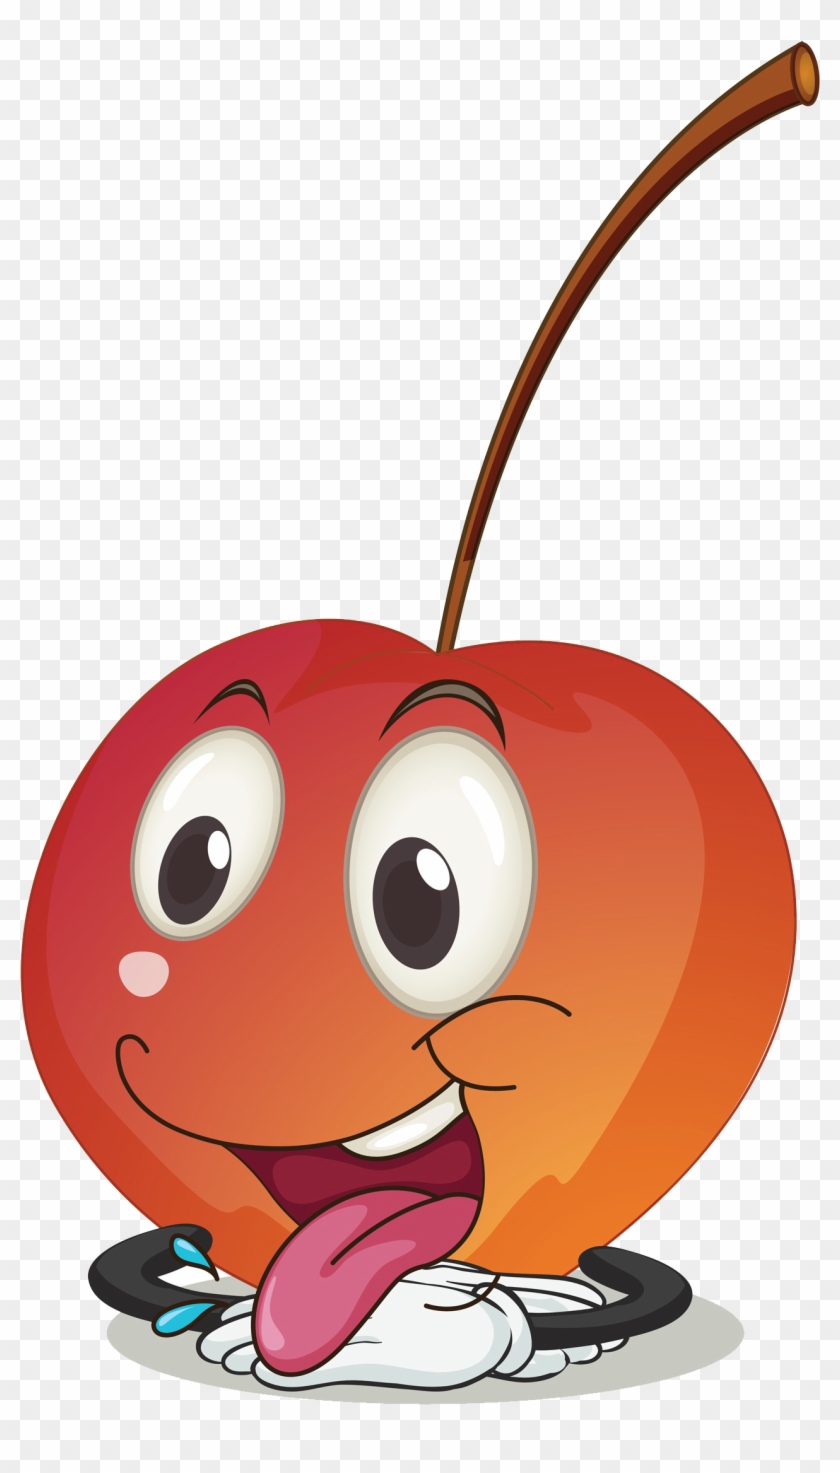 Cartoon Red Apple 1512*2312 Transprent Png Free Download - Cartoon Red Apple 1512*2312 Transprent Png Free Download #627241